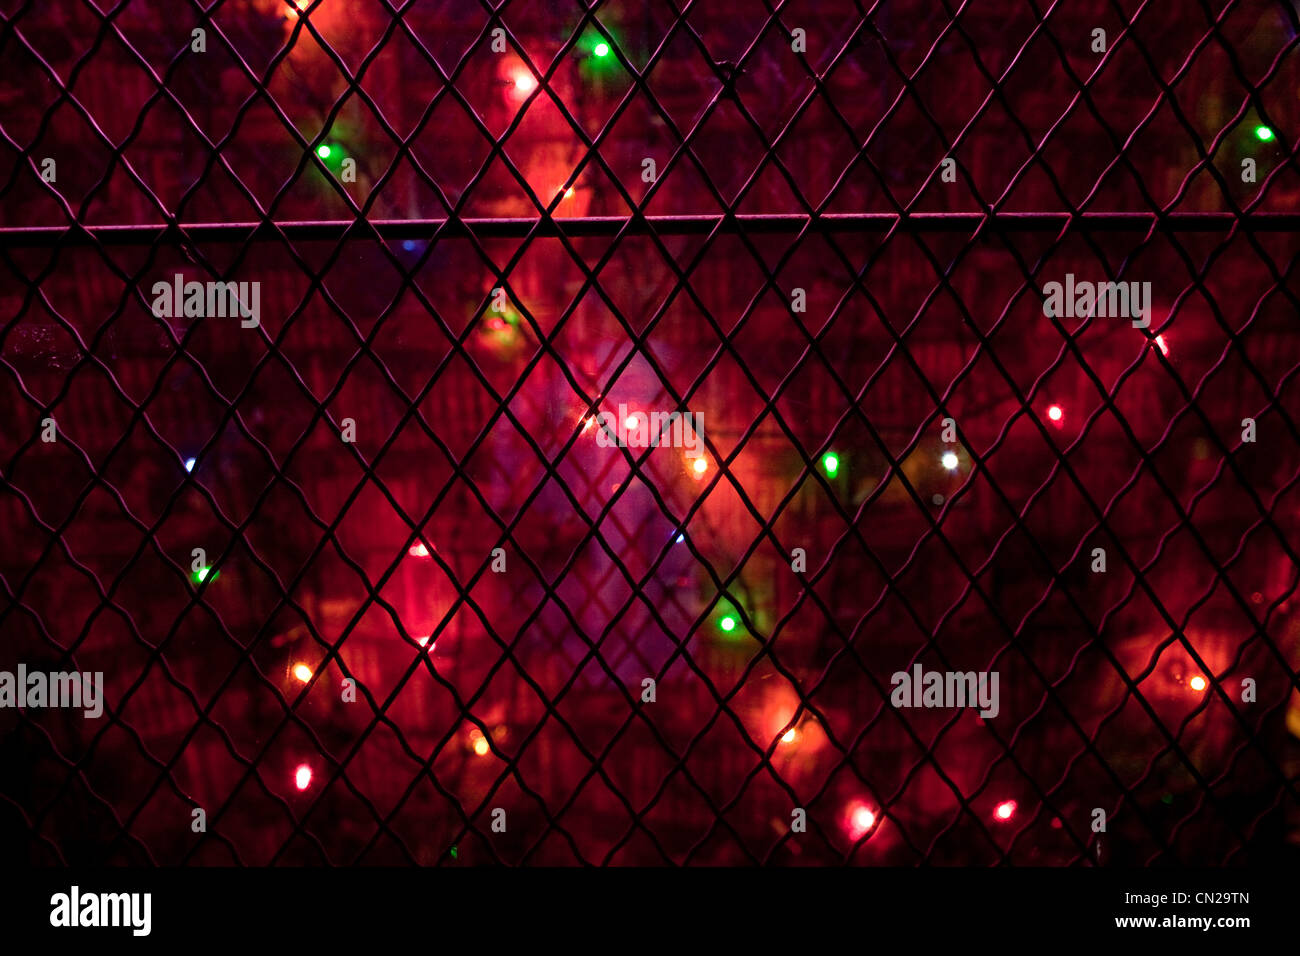 Christmas lights on wire fence Stock Photo